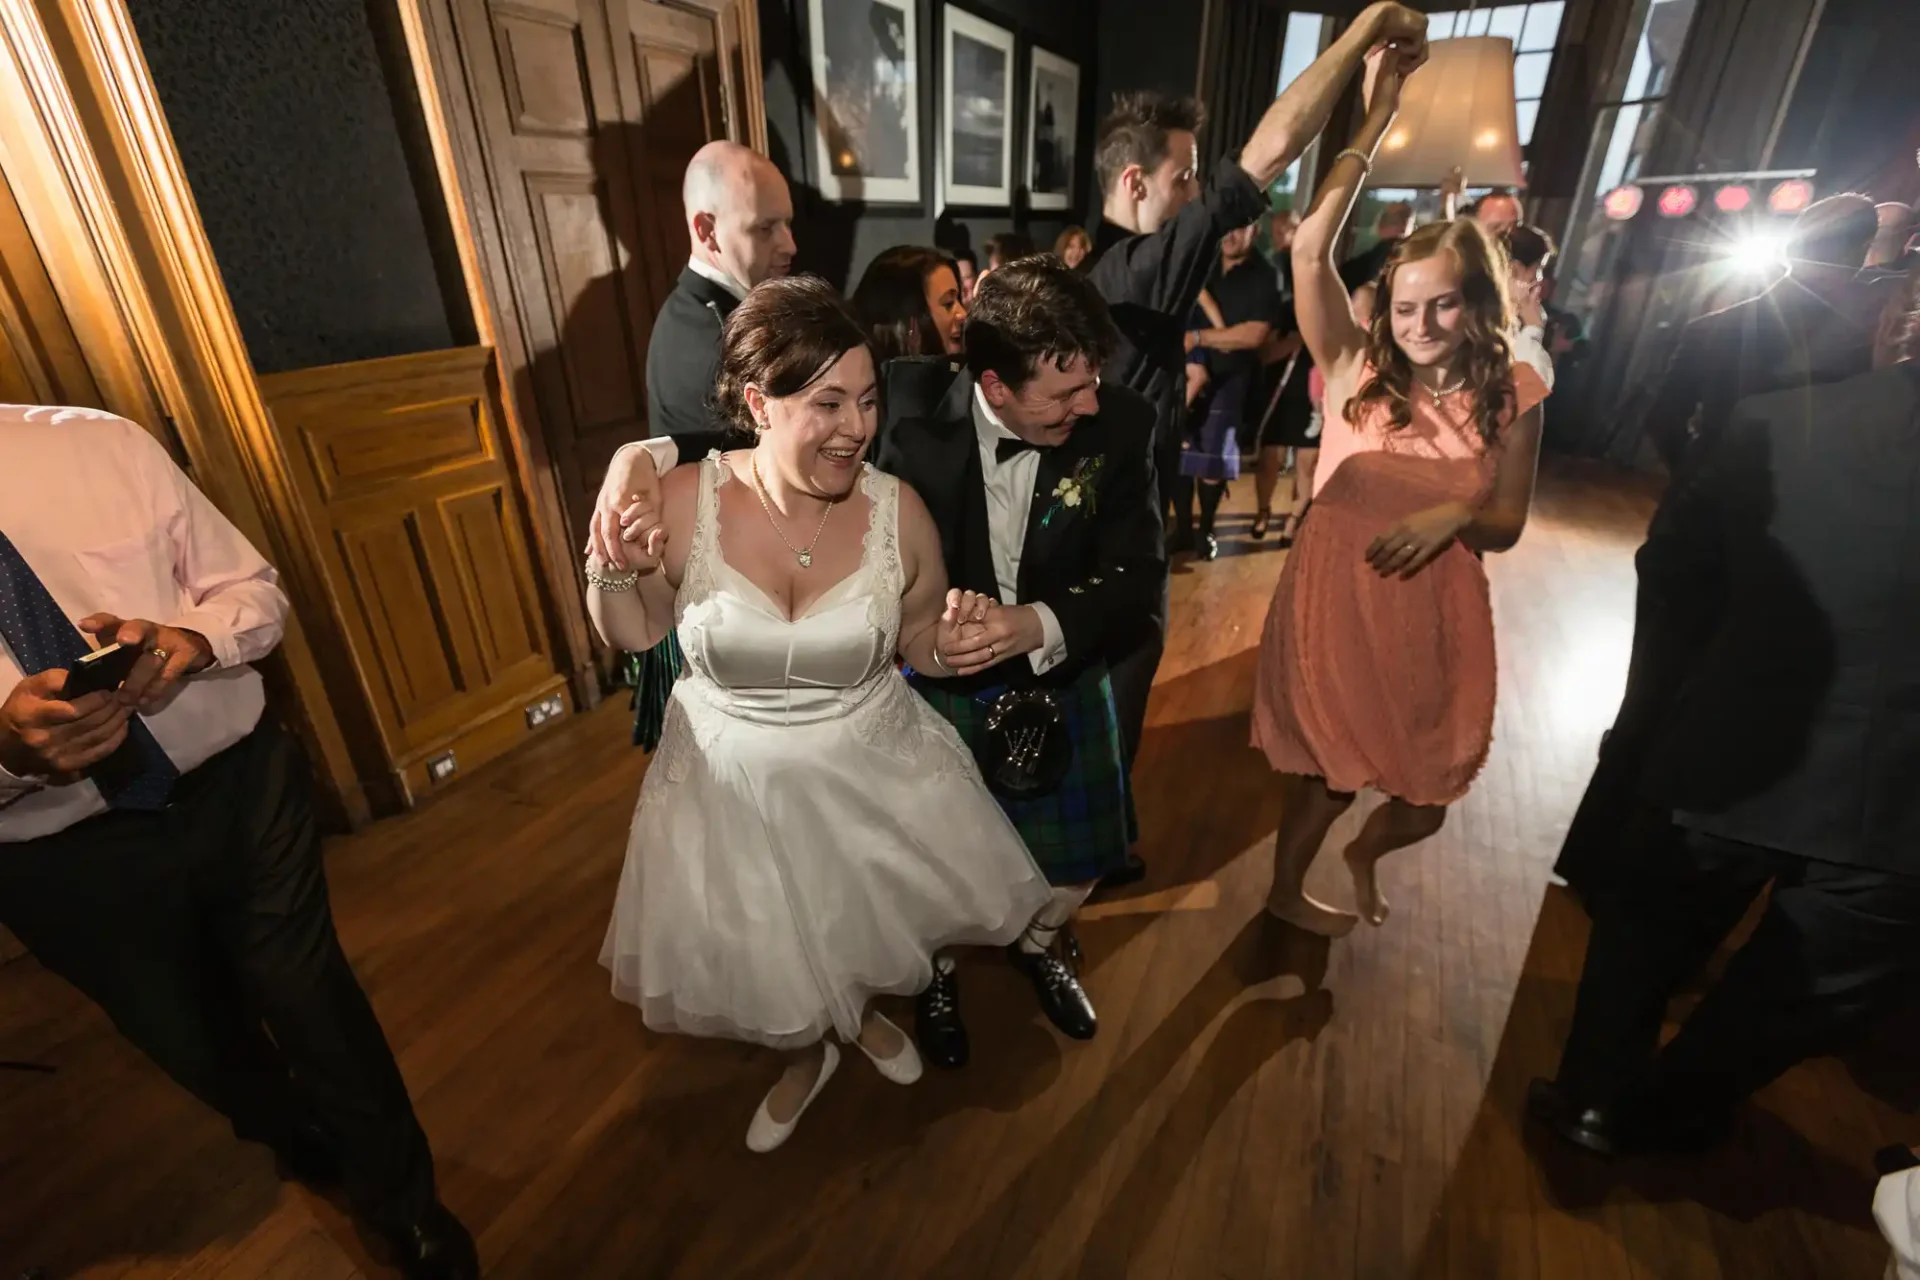 A bride in a white dress and a groom in a kilt dancing joyously among guests in a warmly lit room at a wedding reception.